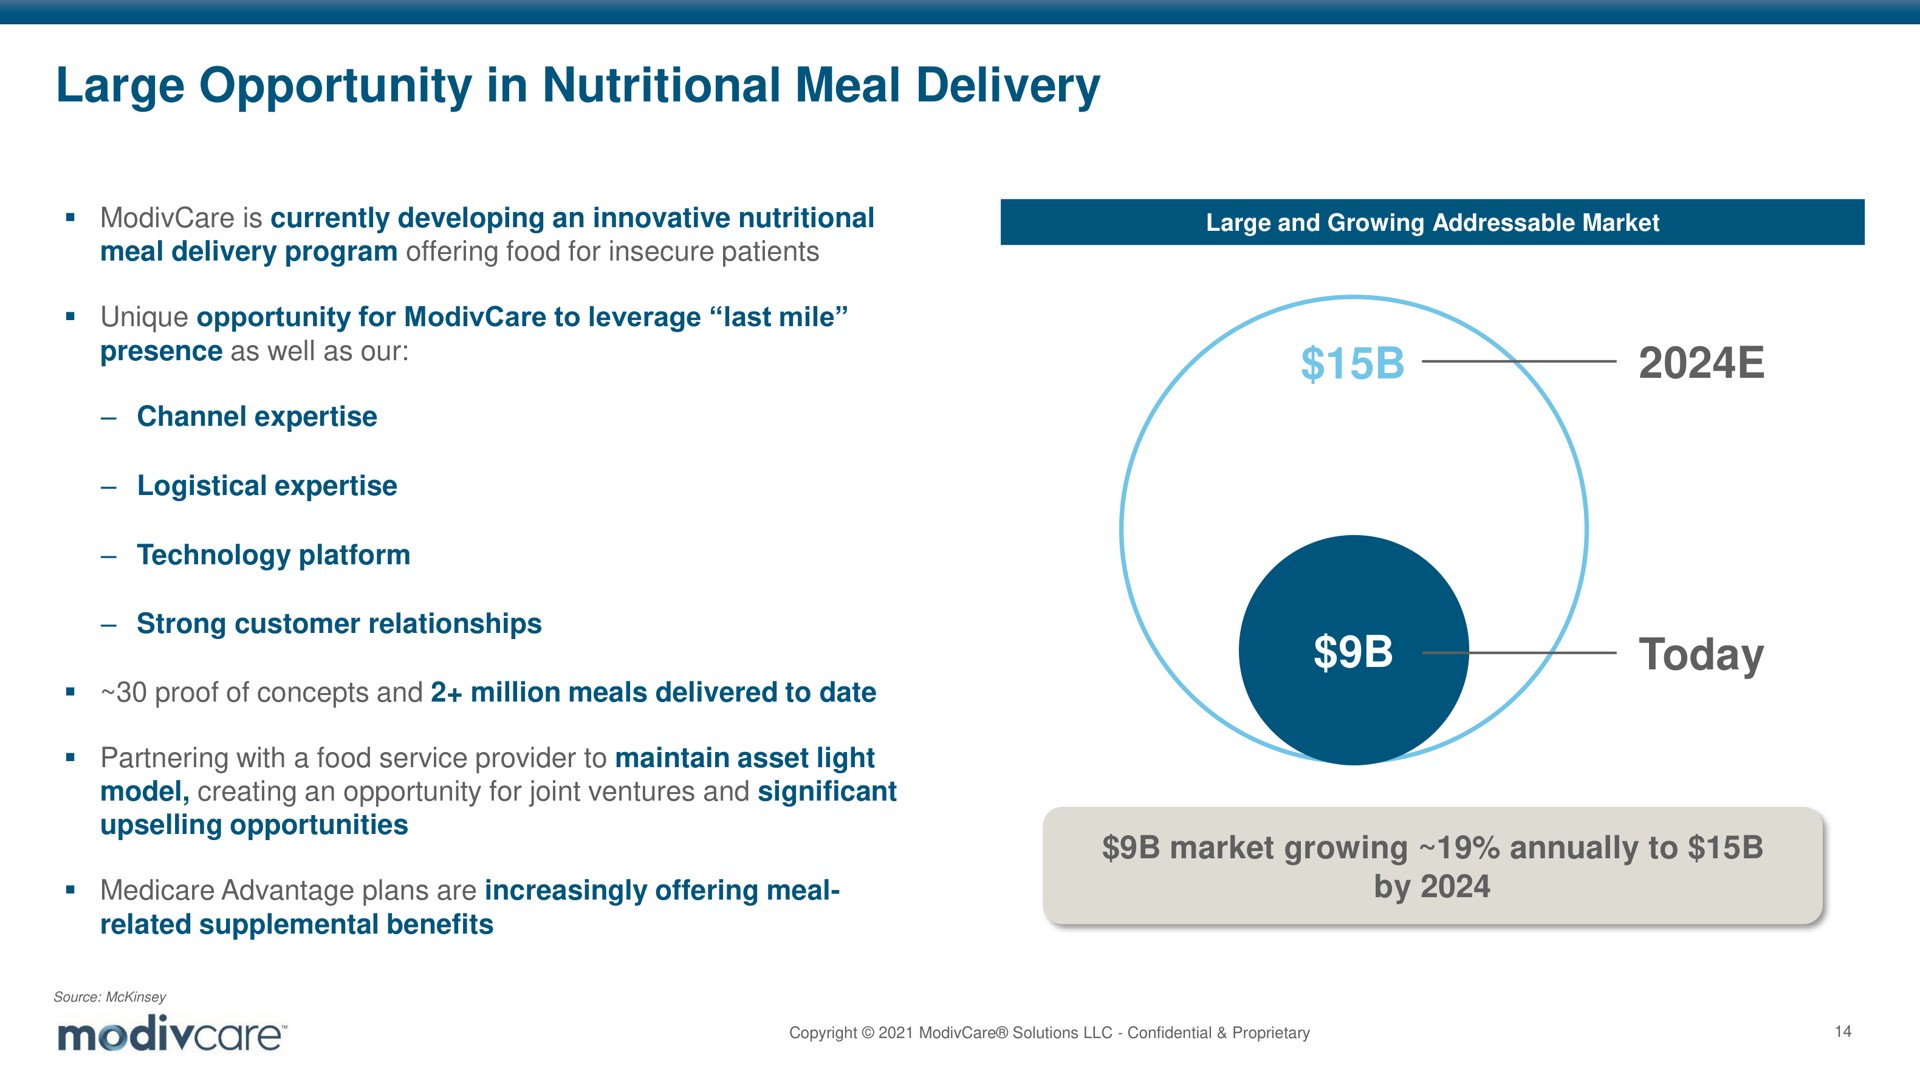 large opportunity in nutritional meal delivery today | ModivCare